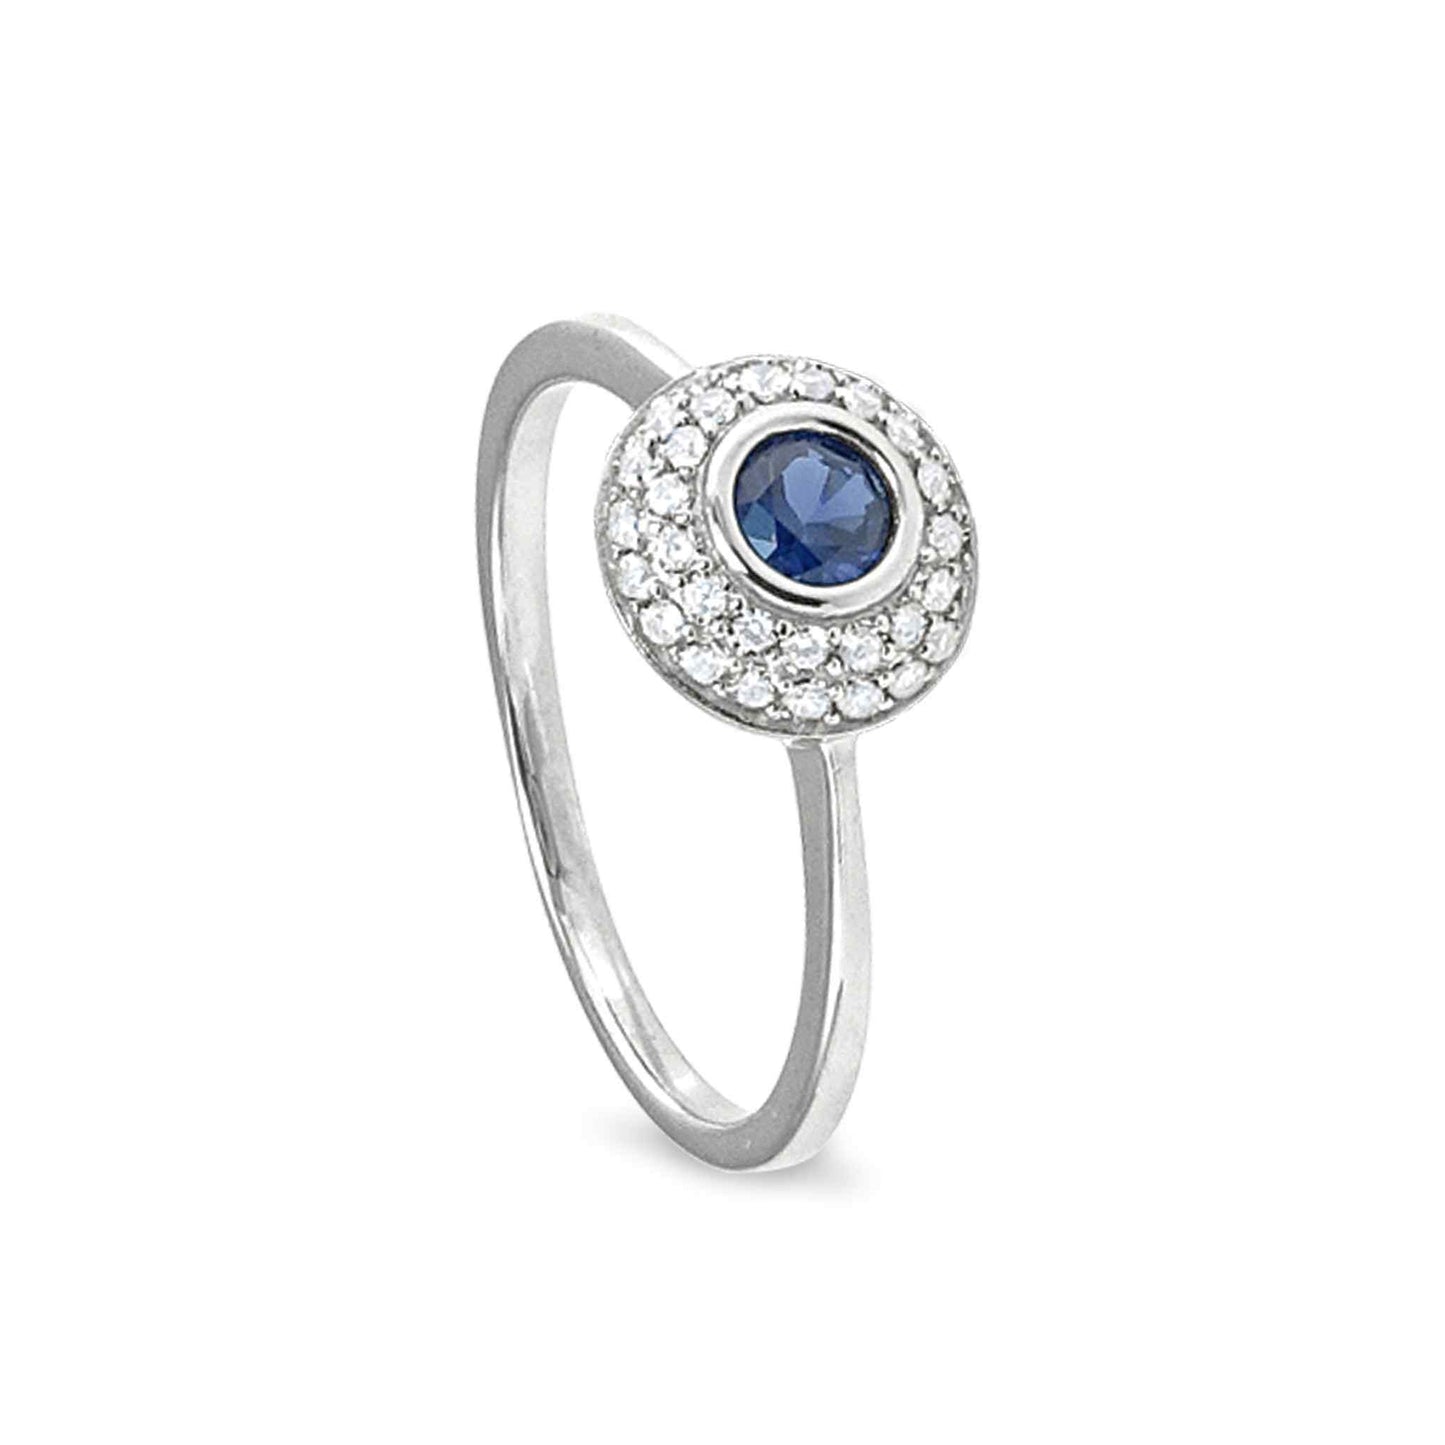 A ring with synthetic blue sapphire and simulated diamonds displayed on a neutral white background.